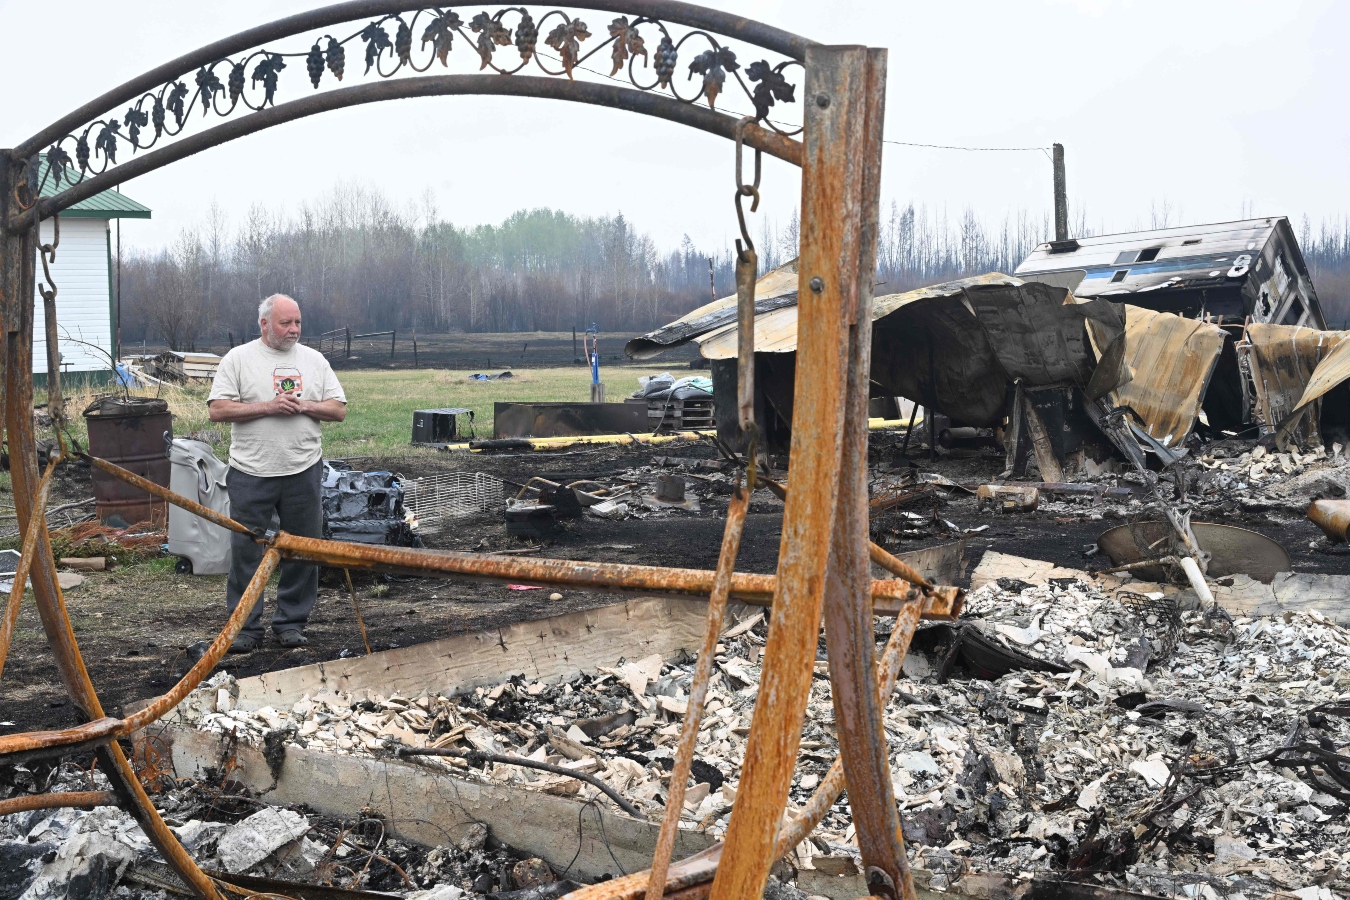 A man stands amid blackened aearth and ashes by a torched porch swing after a wildfire destroyed his home.